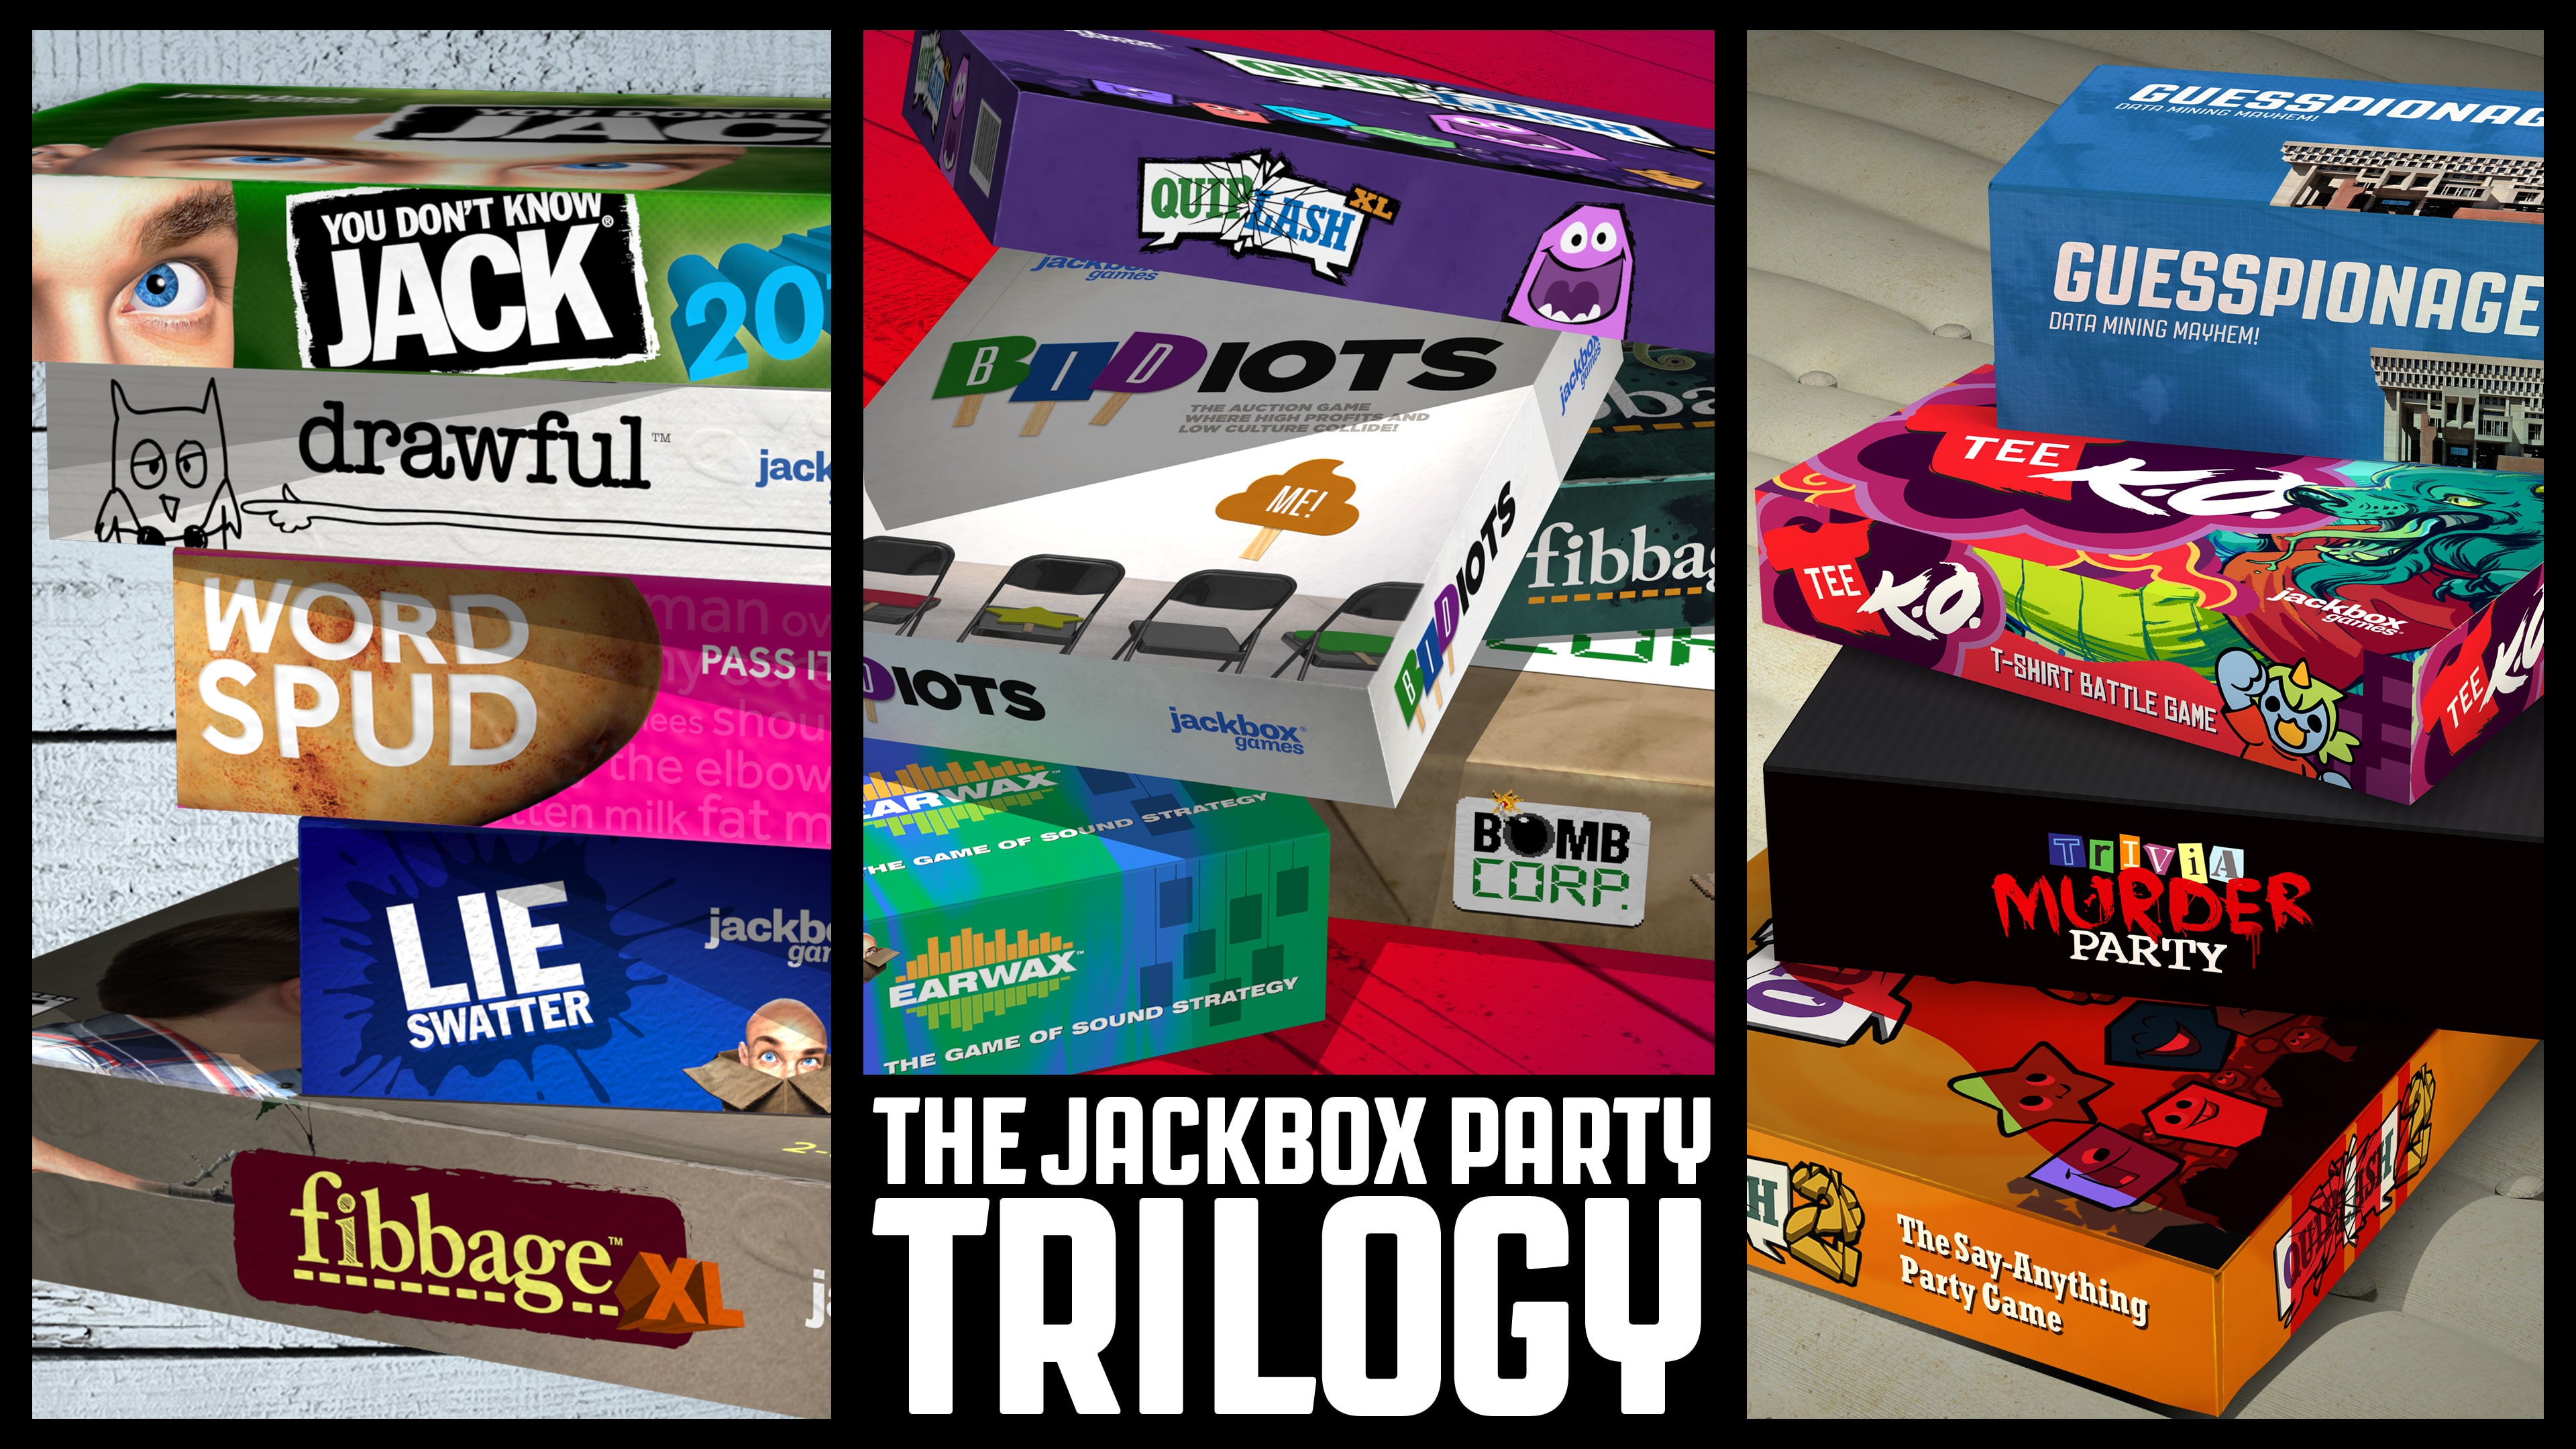 The Jackbox Party Pack Trilogy